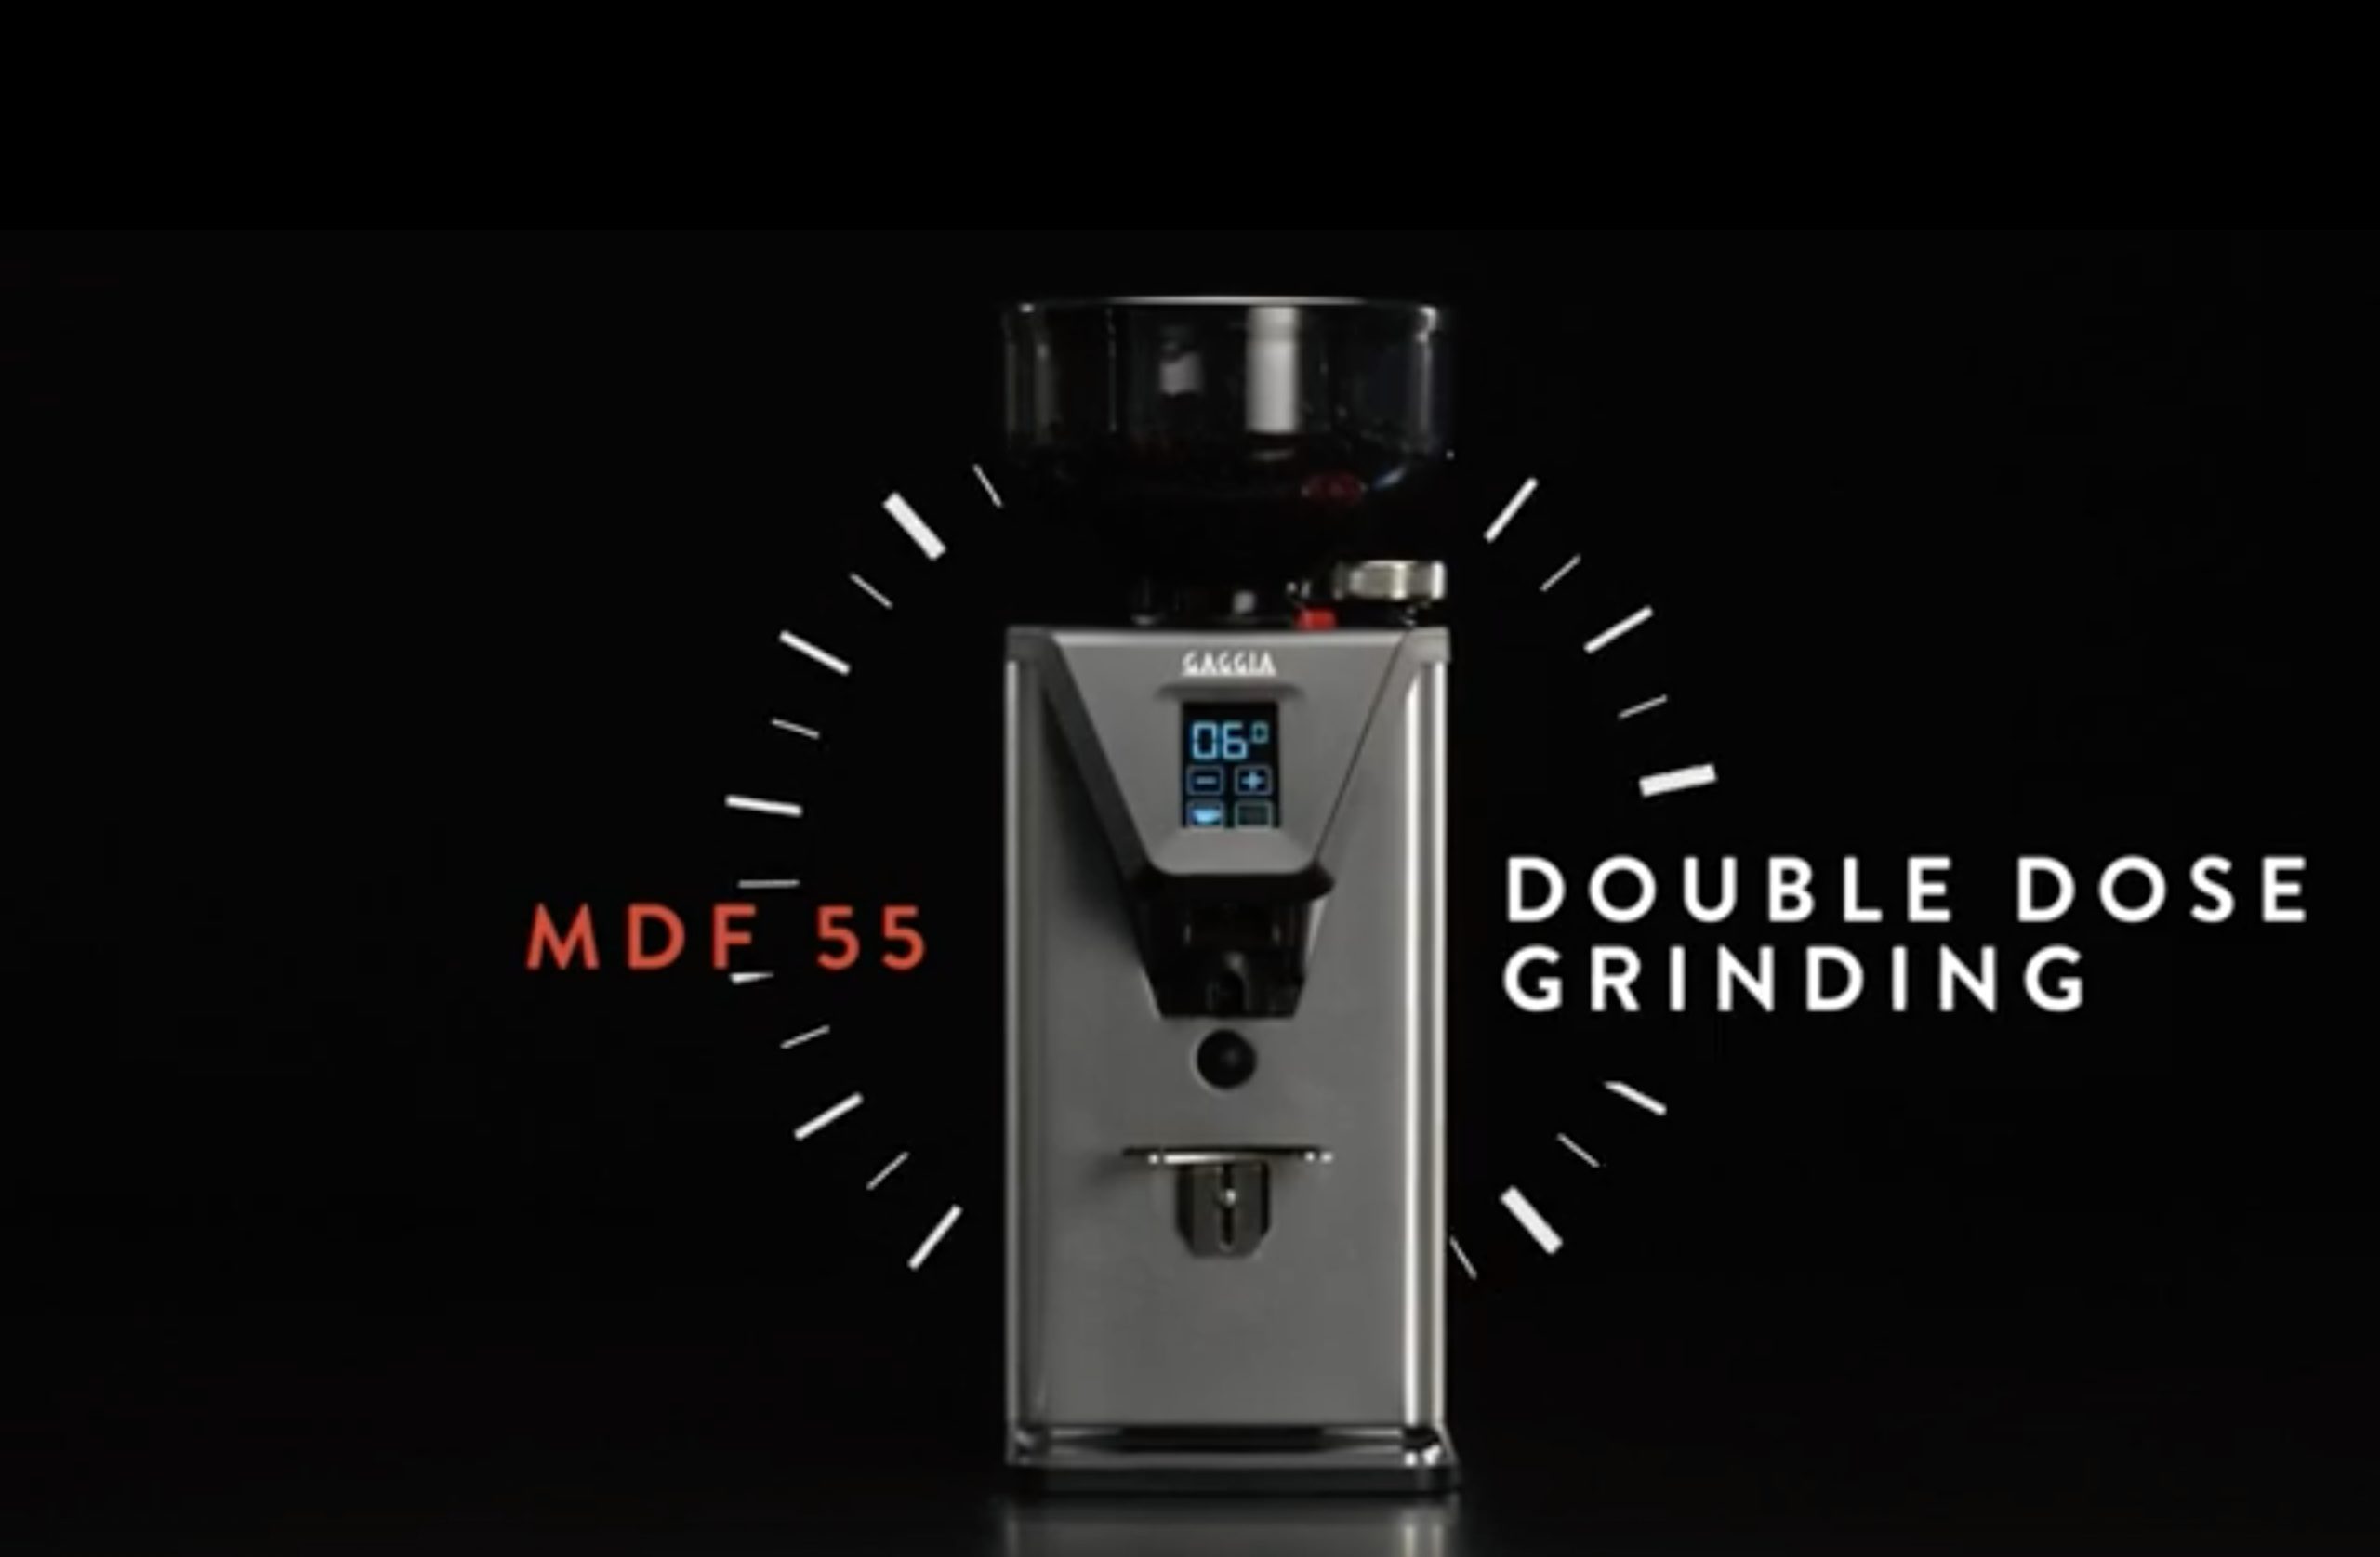 DOUBLE DOSE GRINDING